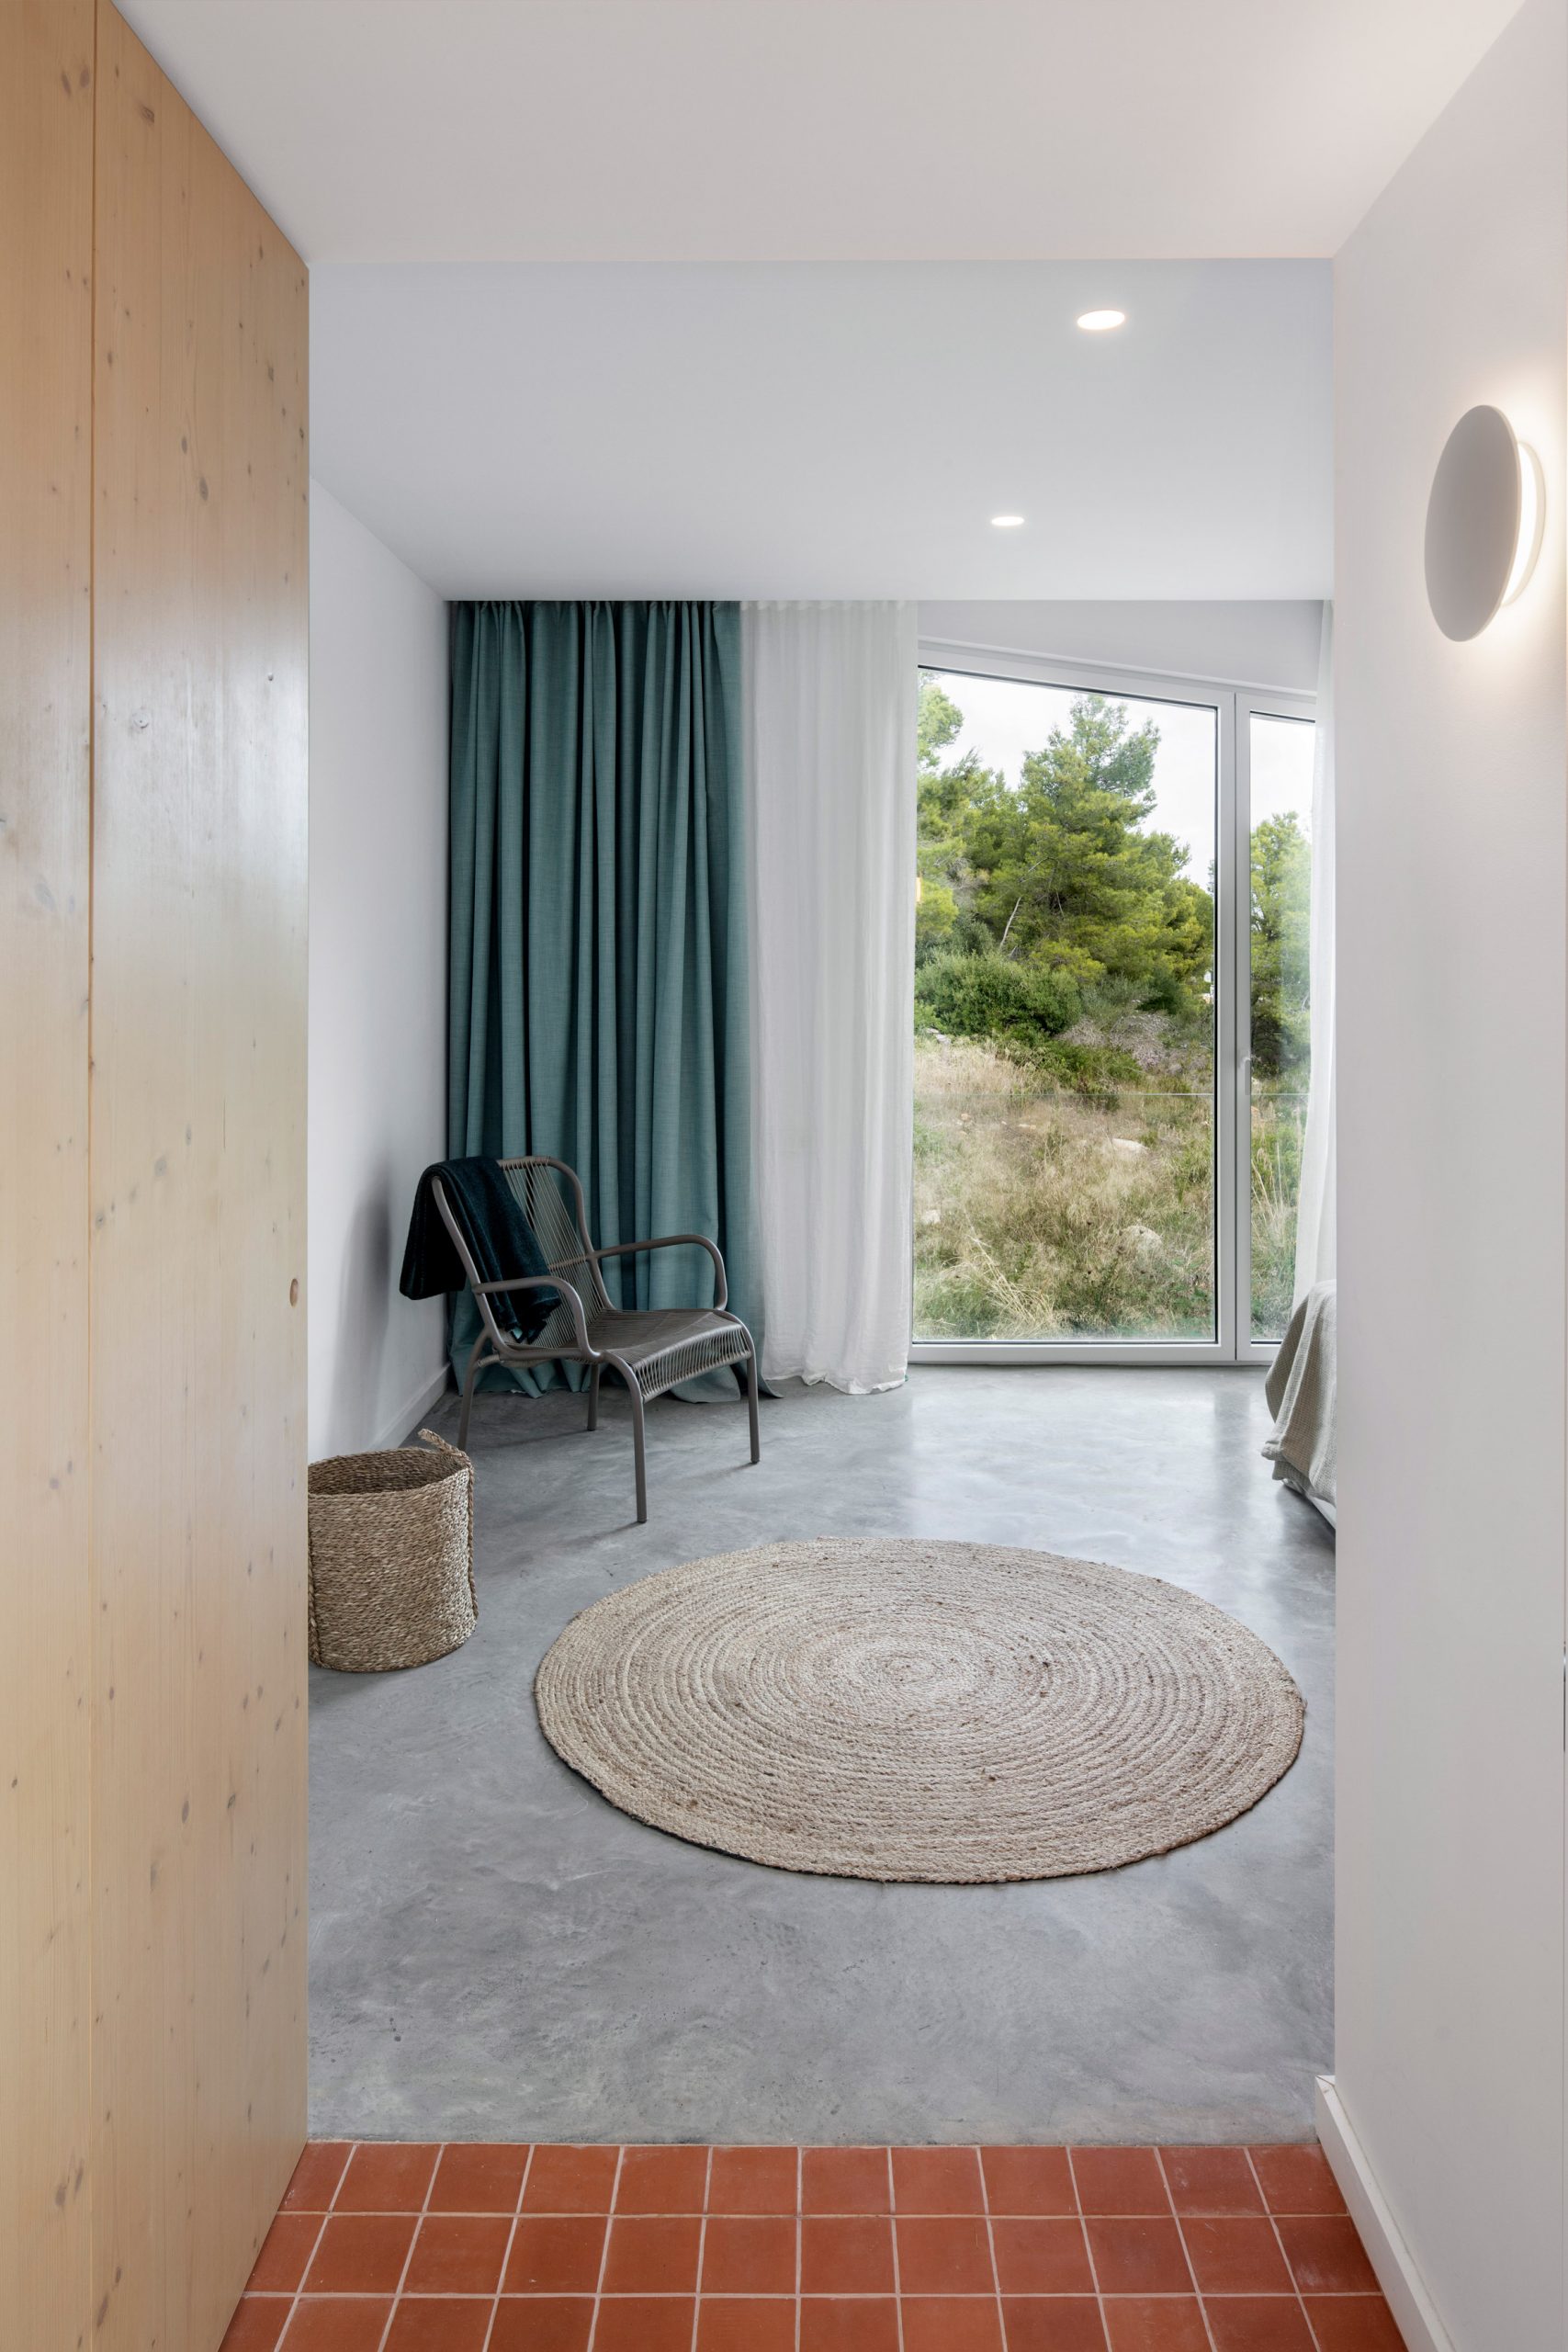 Terracotta tiles and concrete cover the floors at Curved House